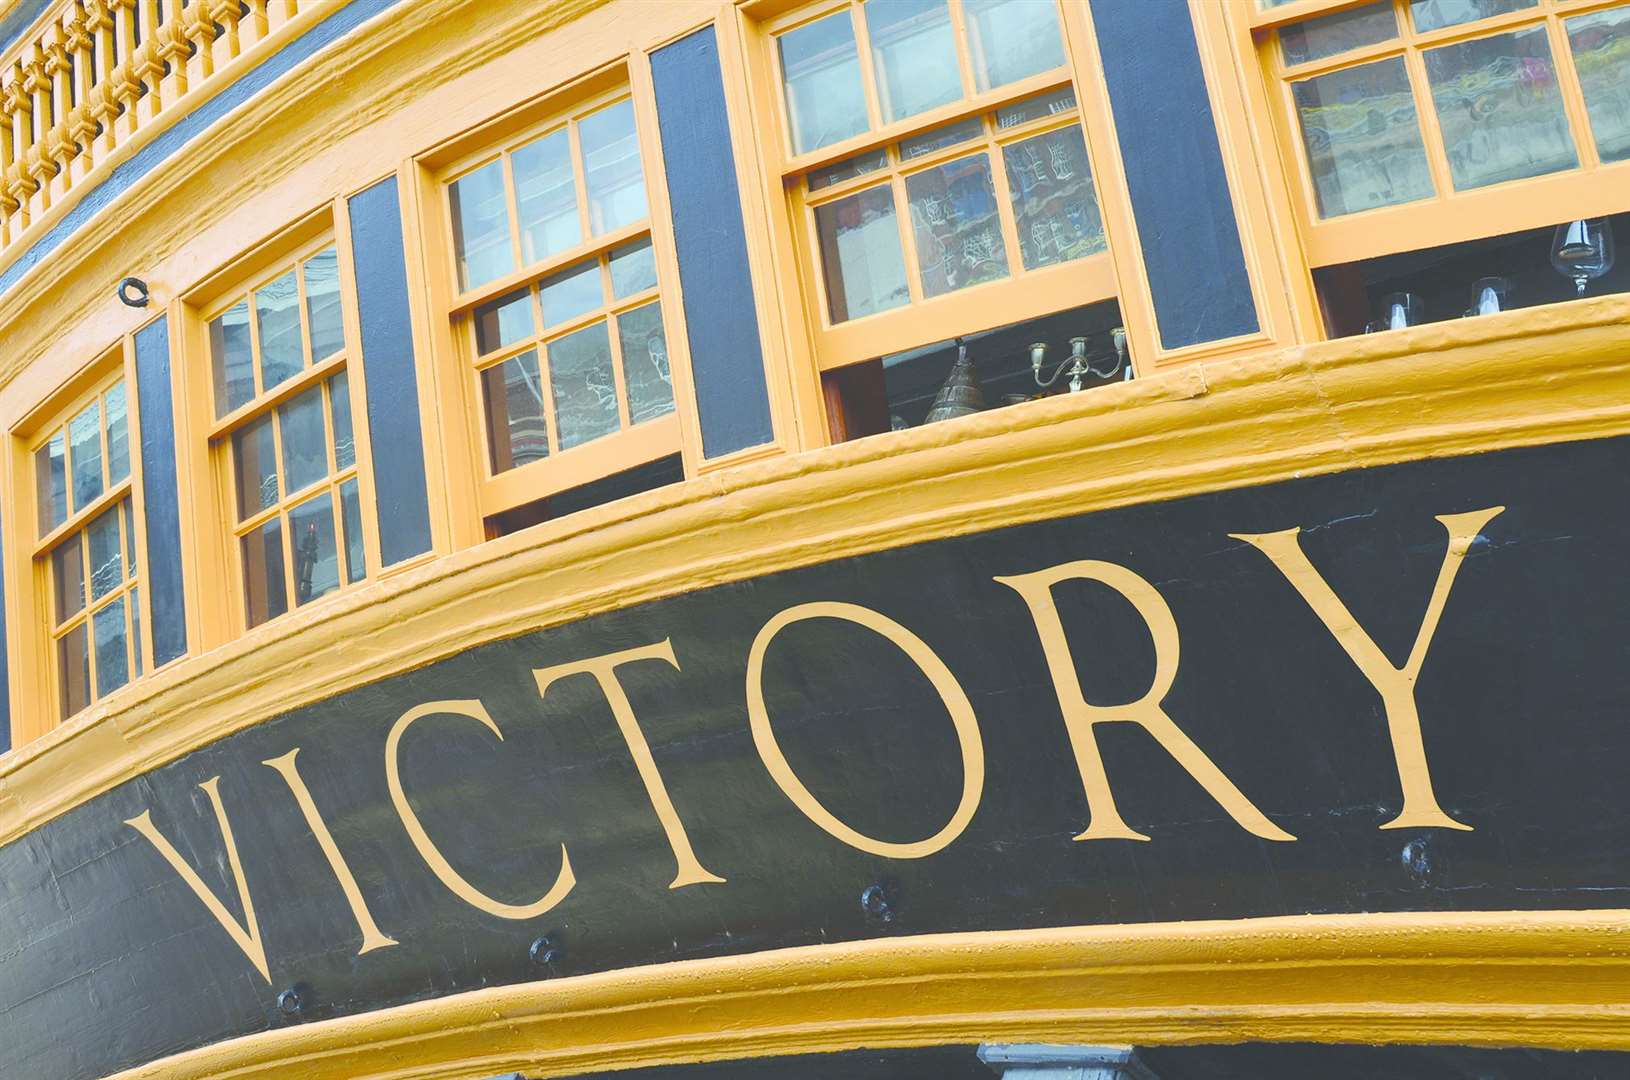 Nelson's flagship HMS Victory was built in Chatham